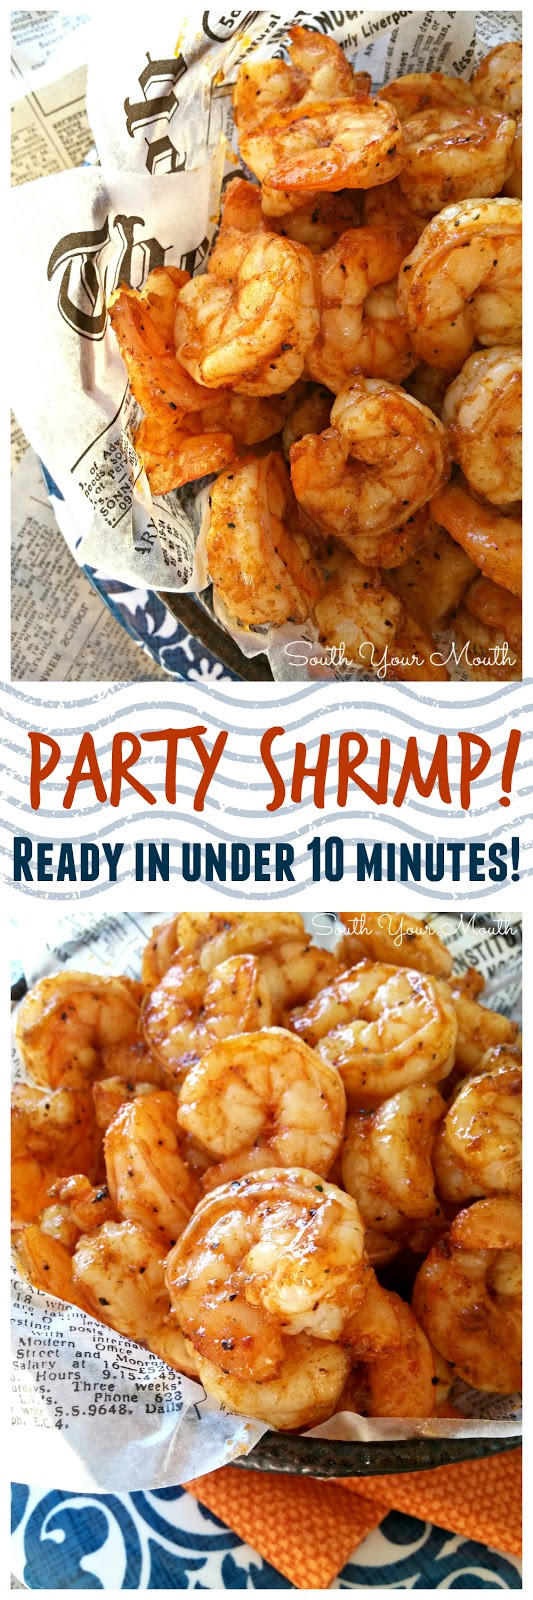 Seafood Party Appetizers
 South Your Mouth Party Shrimp